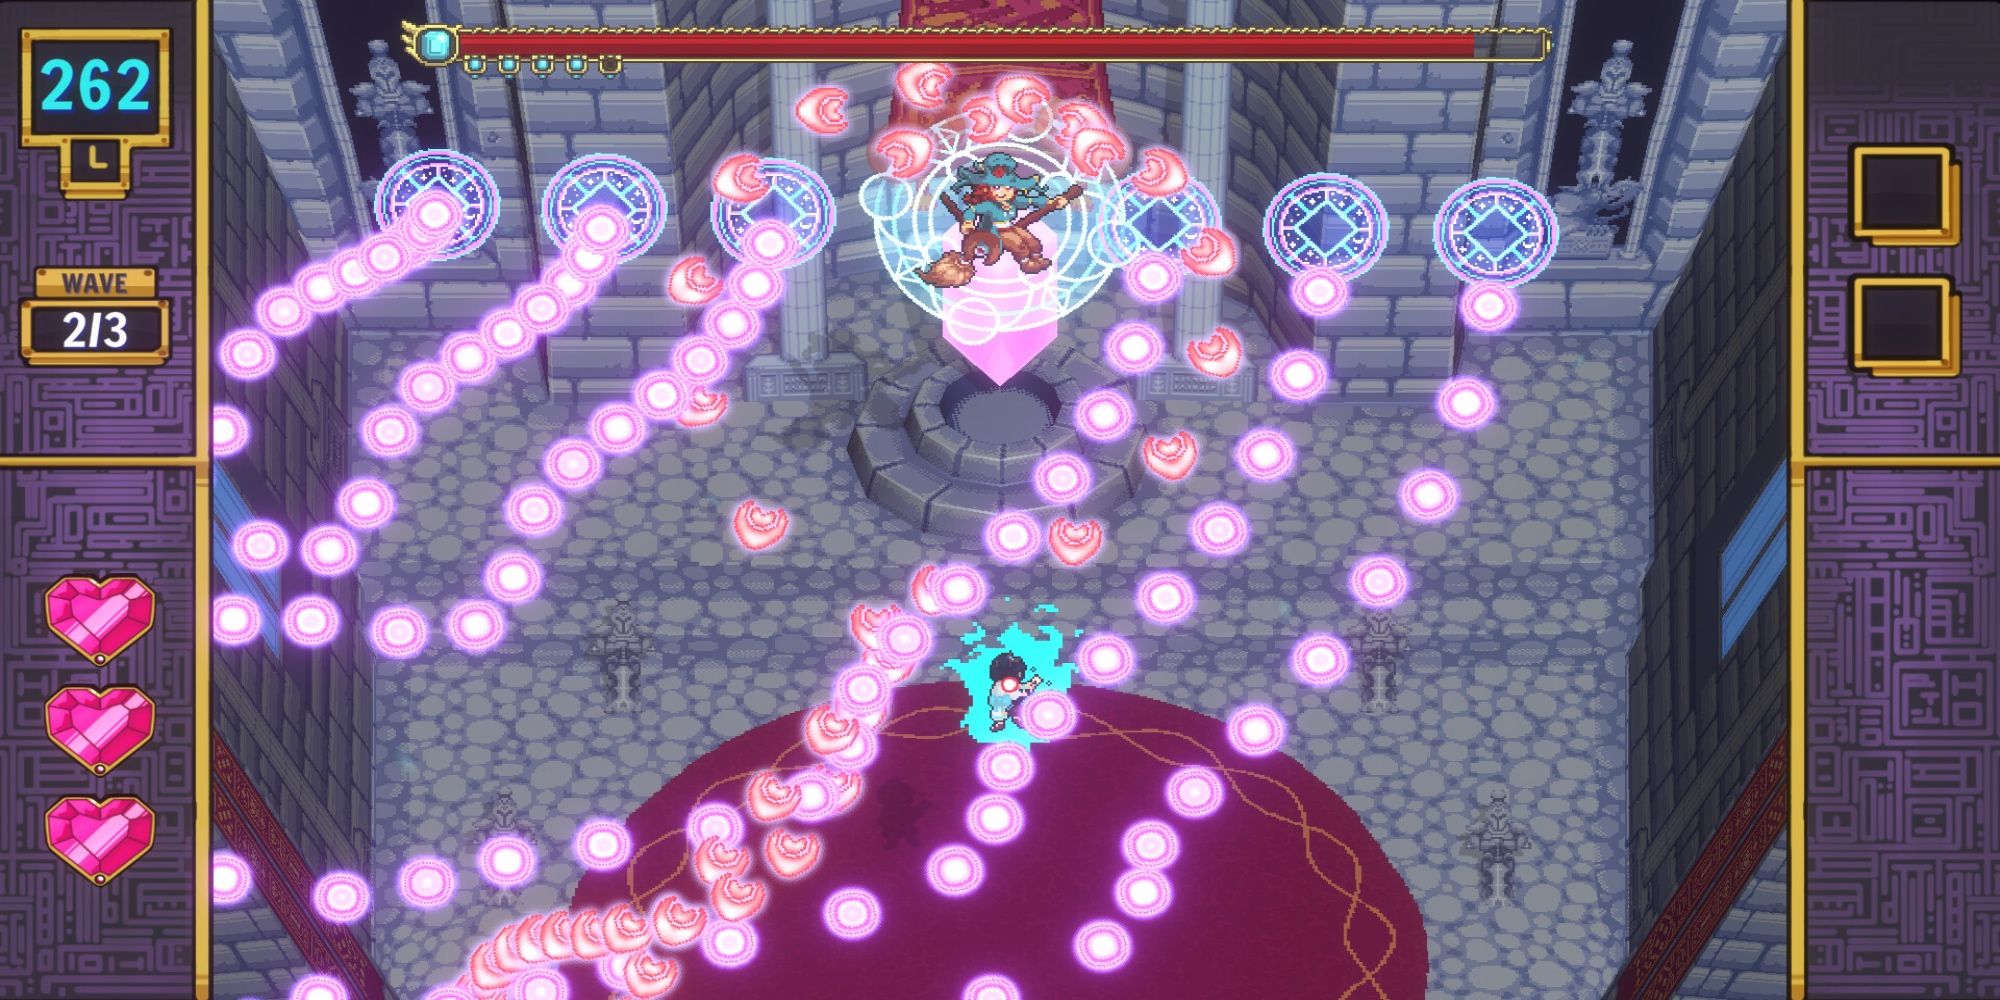 Player tries to dodge attacks during a boss battle